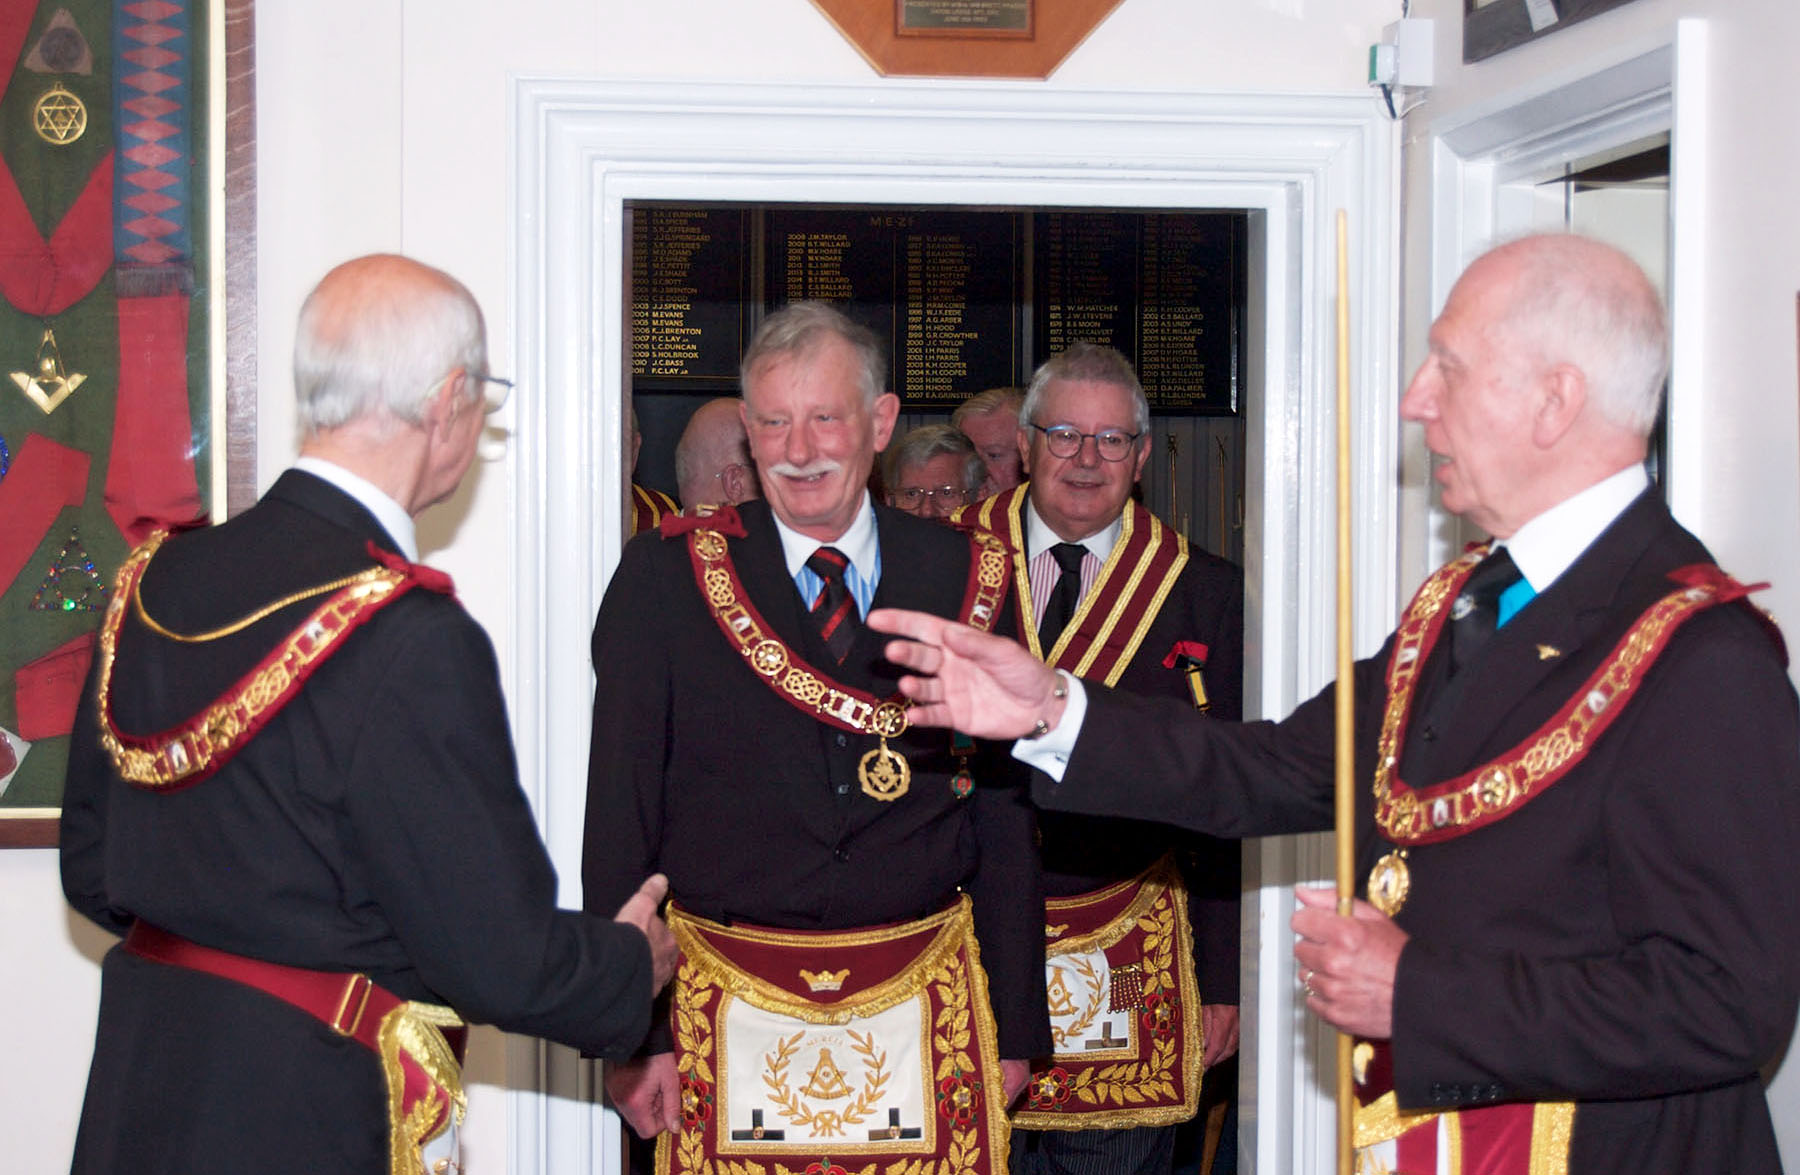 Annual Assembly of Provincial Grand Court of Sussex 2019